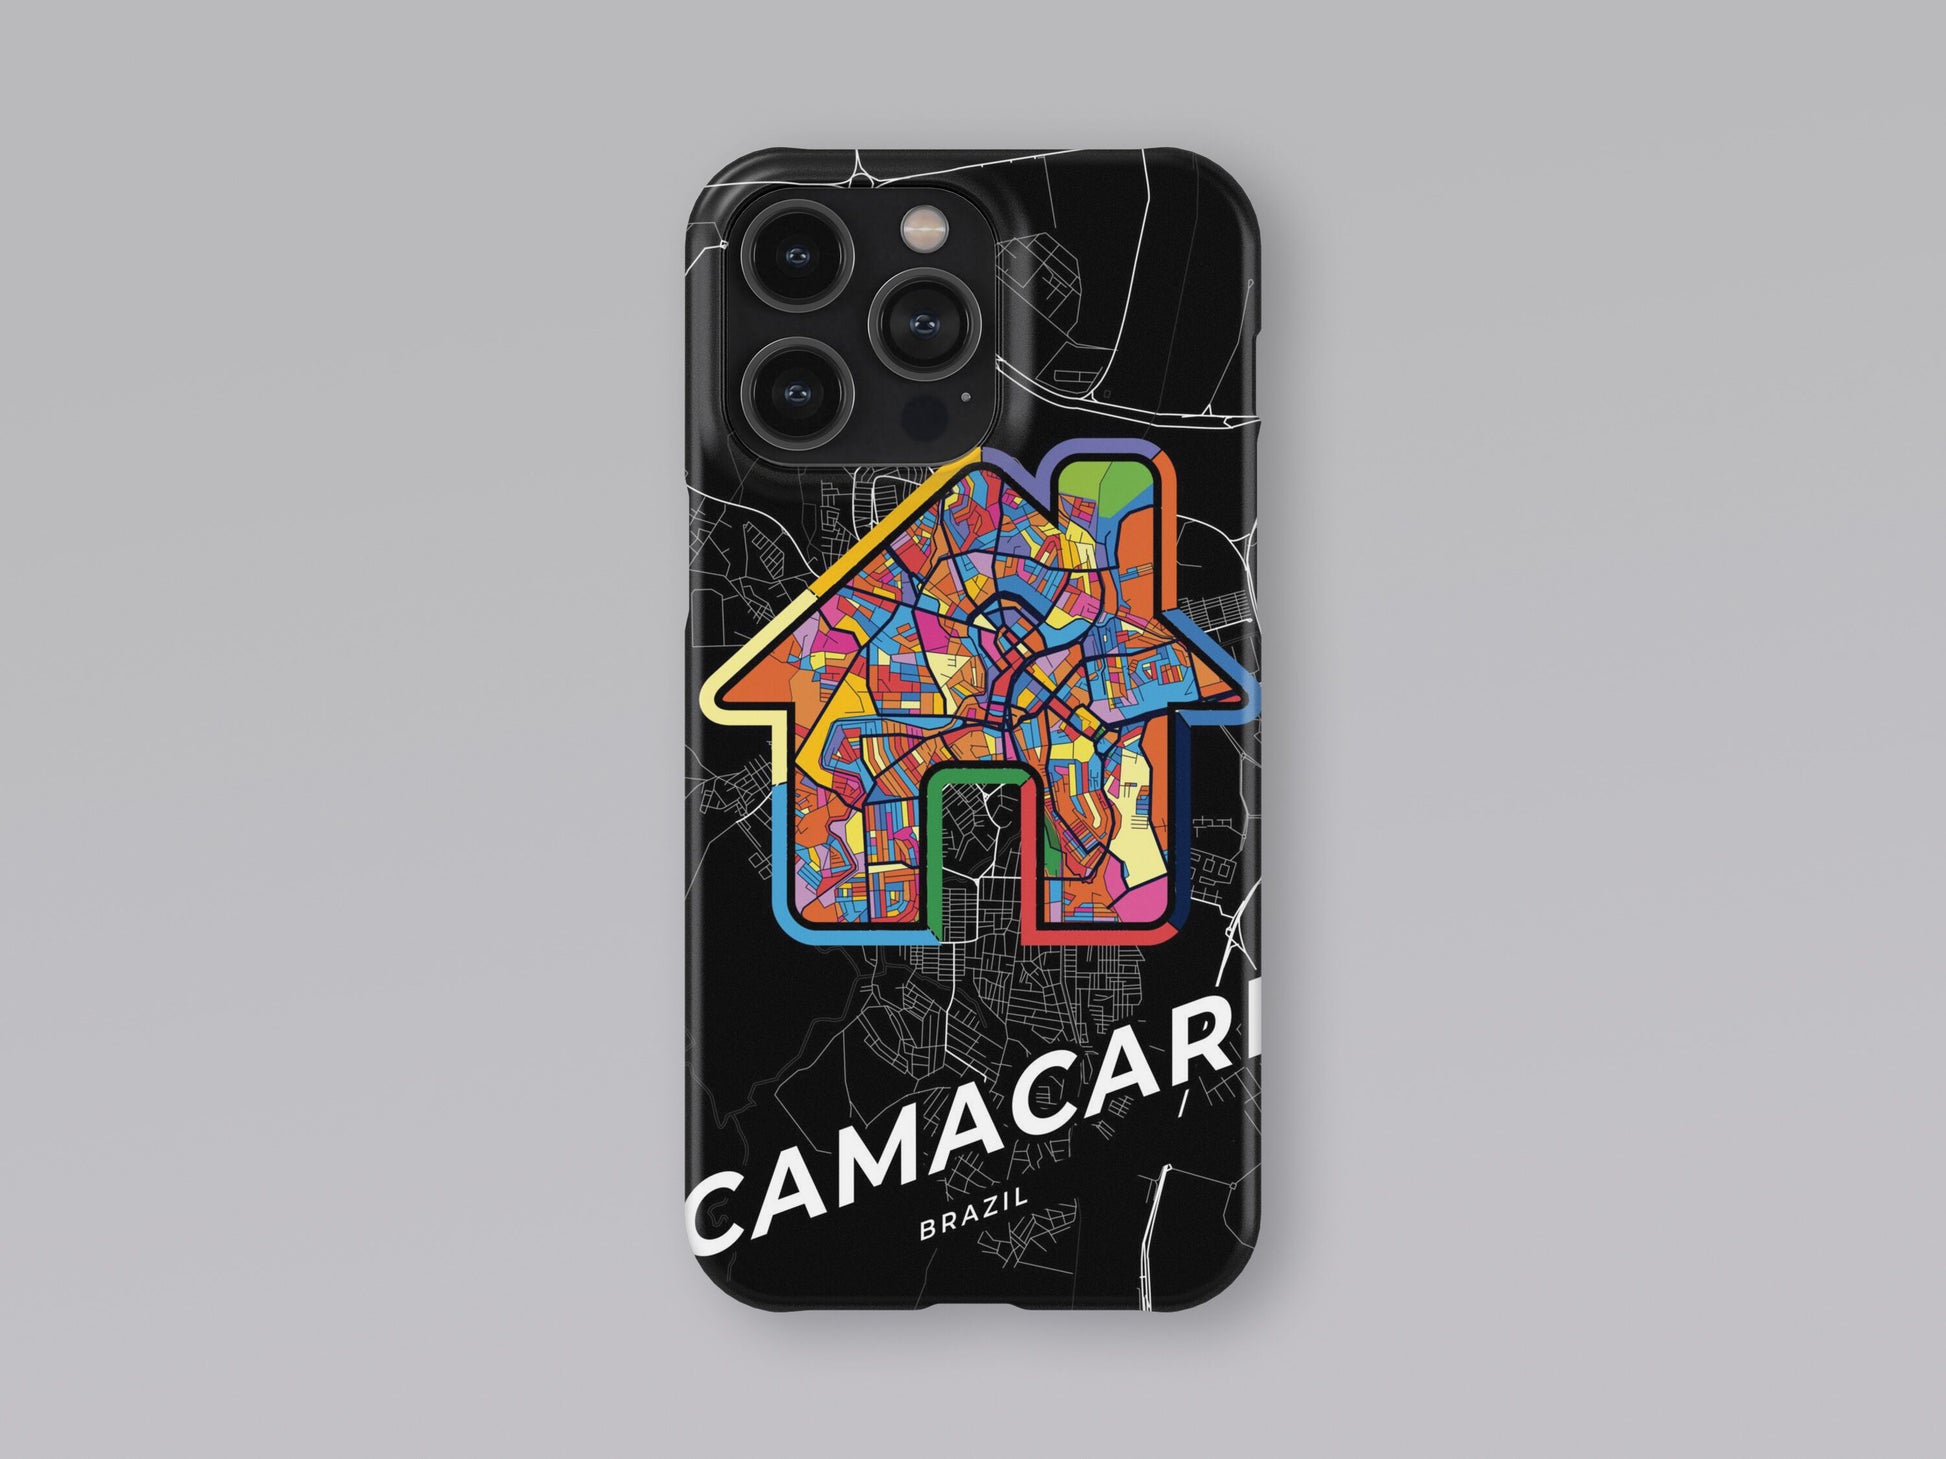 Camacari Brazil slim phone case with colorful icon. Birthday, wedding or housewarming gift. Couple match cases. 3